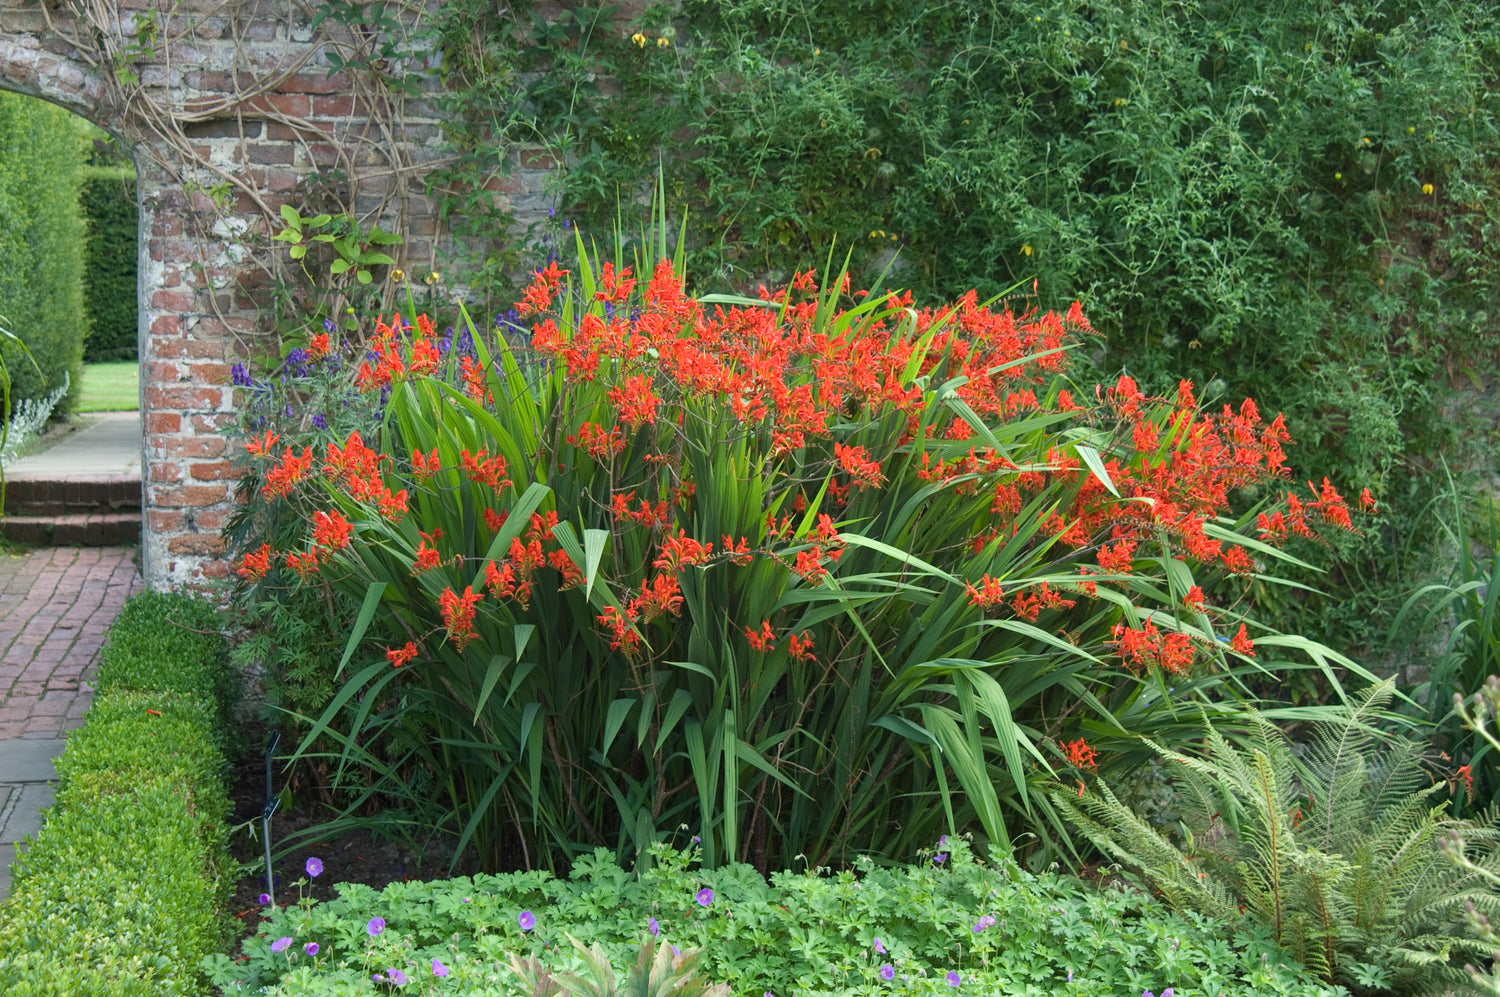 A big patch of Lucifer crocosmia in bloom with bright red flowers